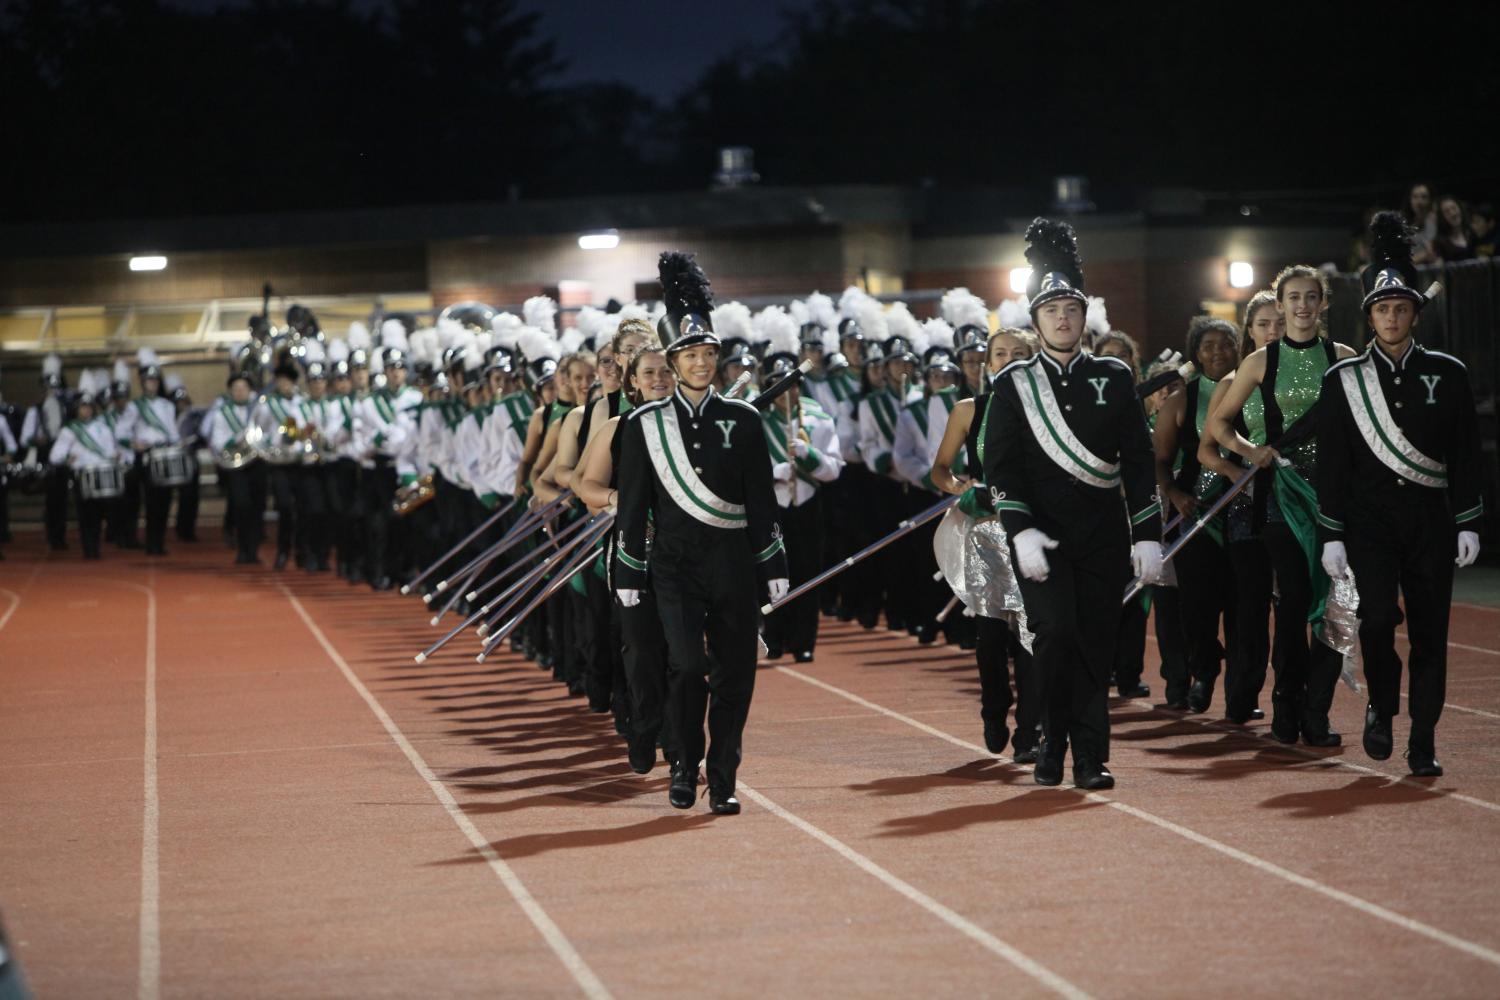 We march over with the band at the football games, following the drum majors.